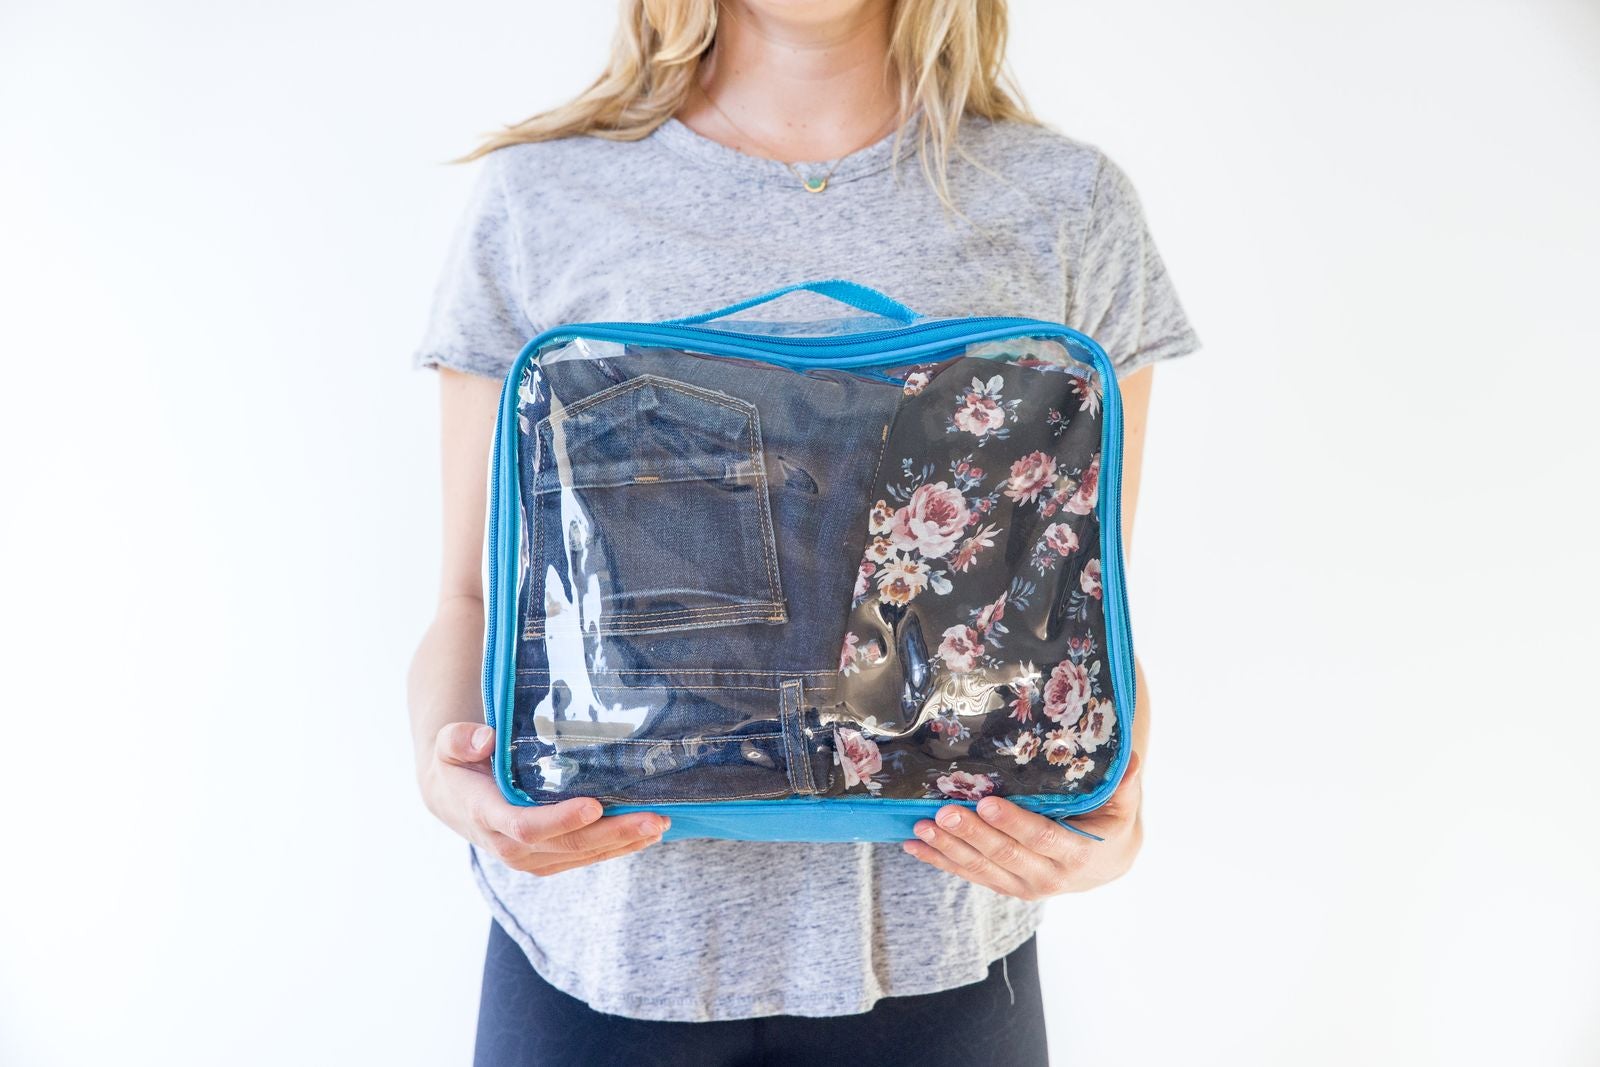 Jeans packed in turquoise clear packing cube